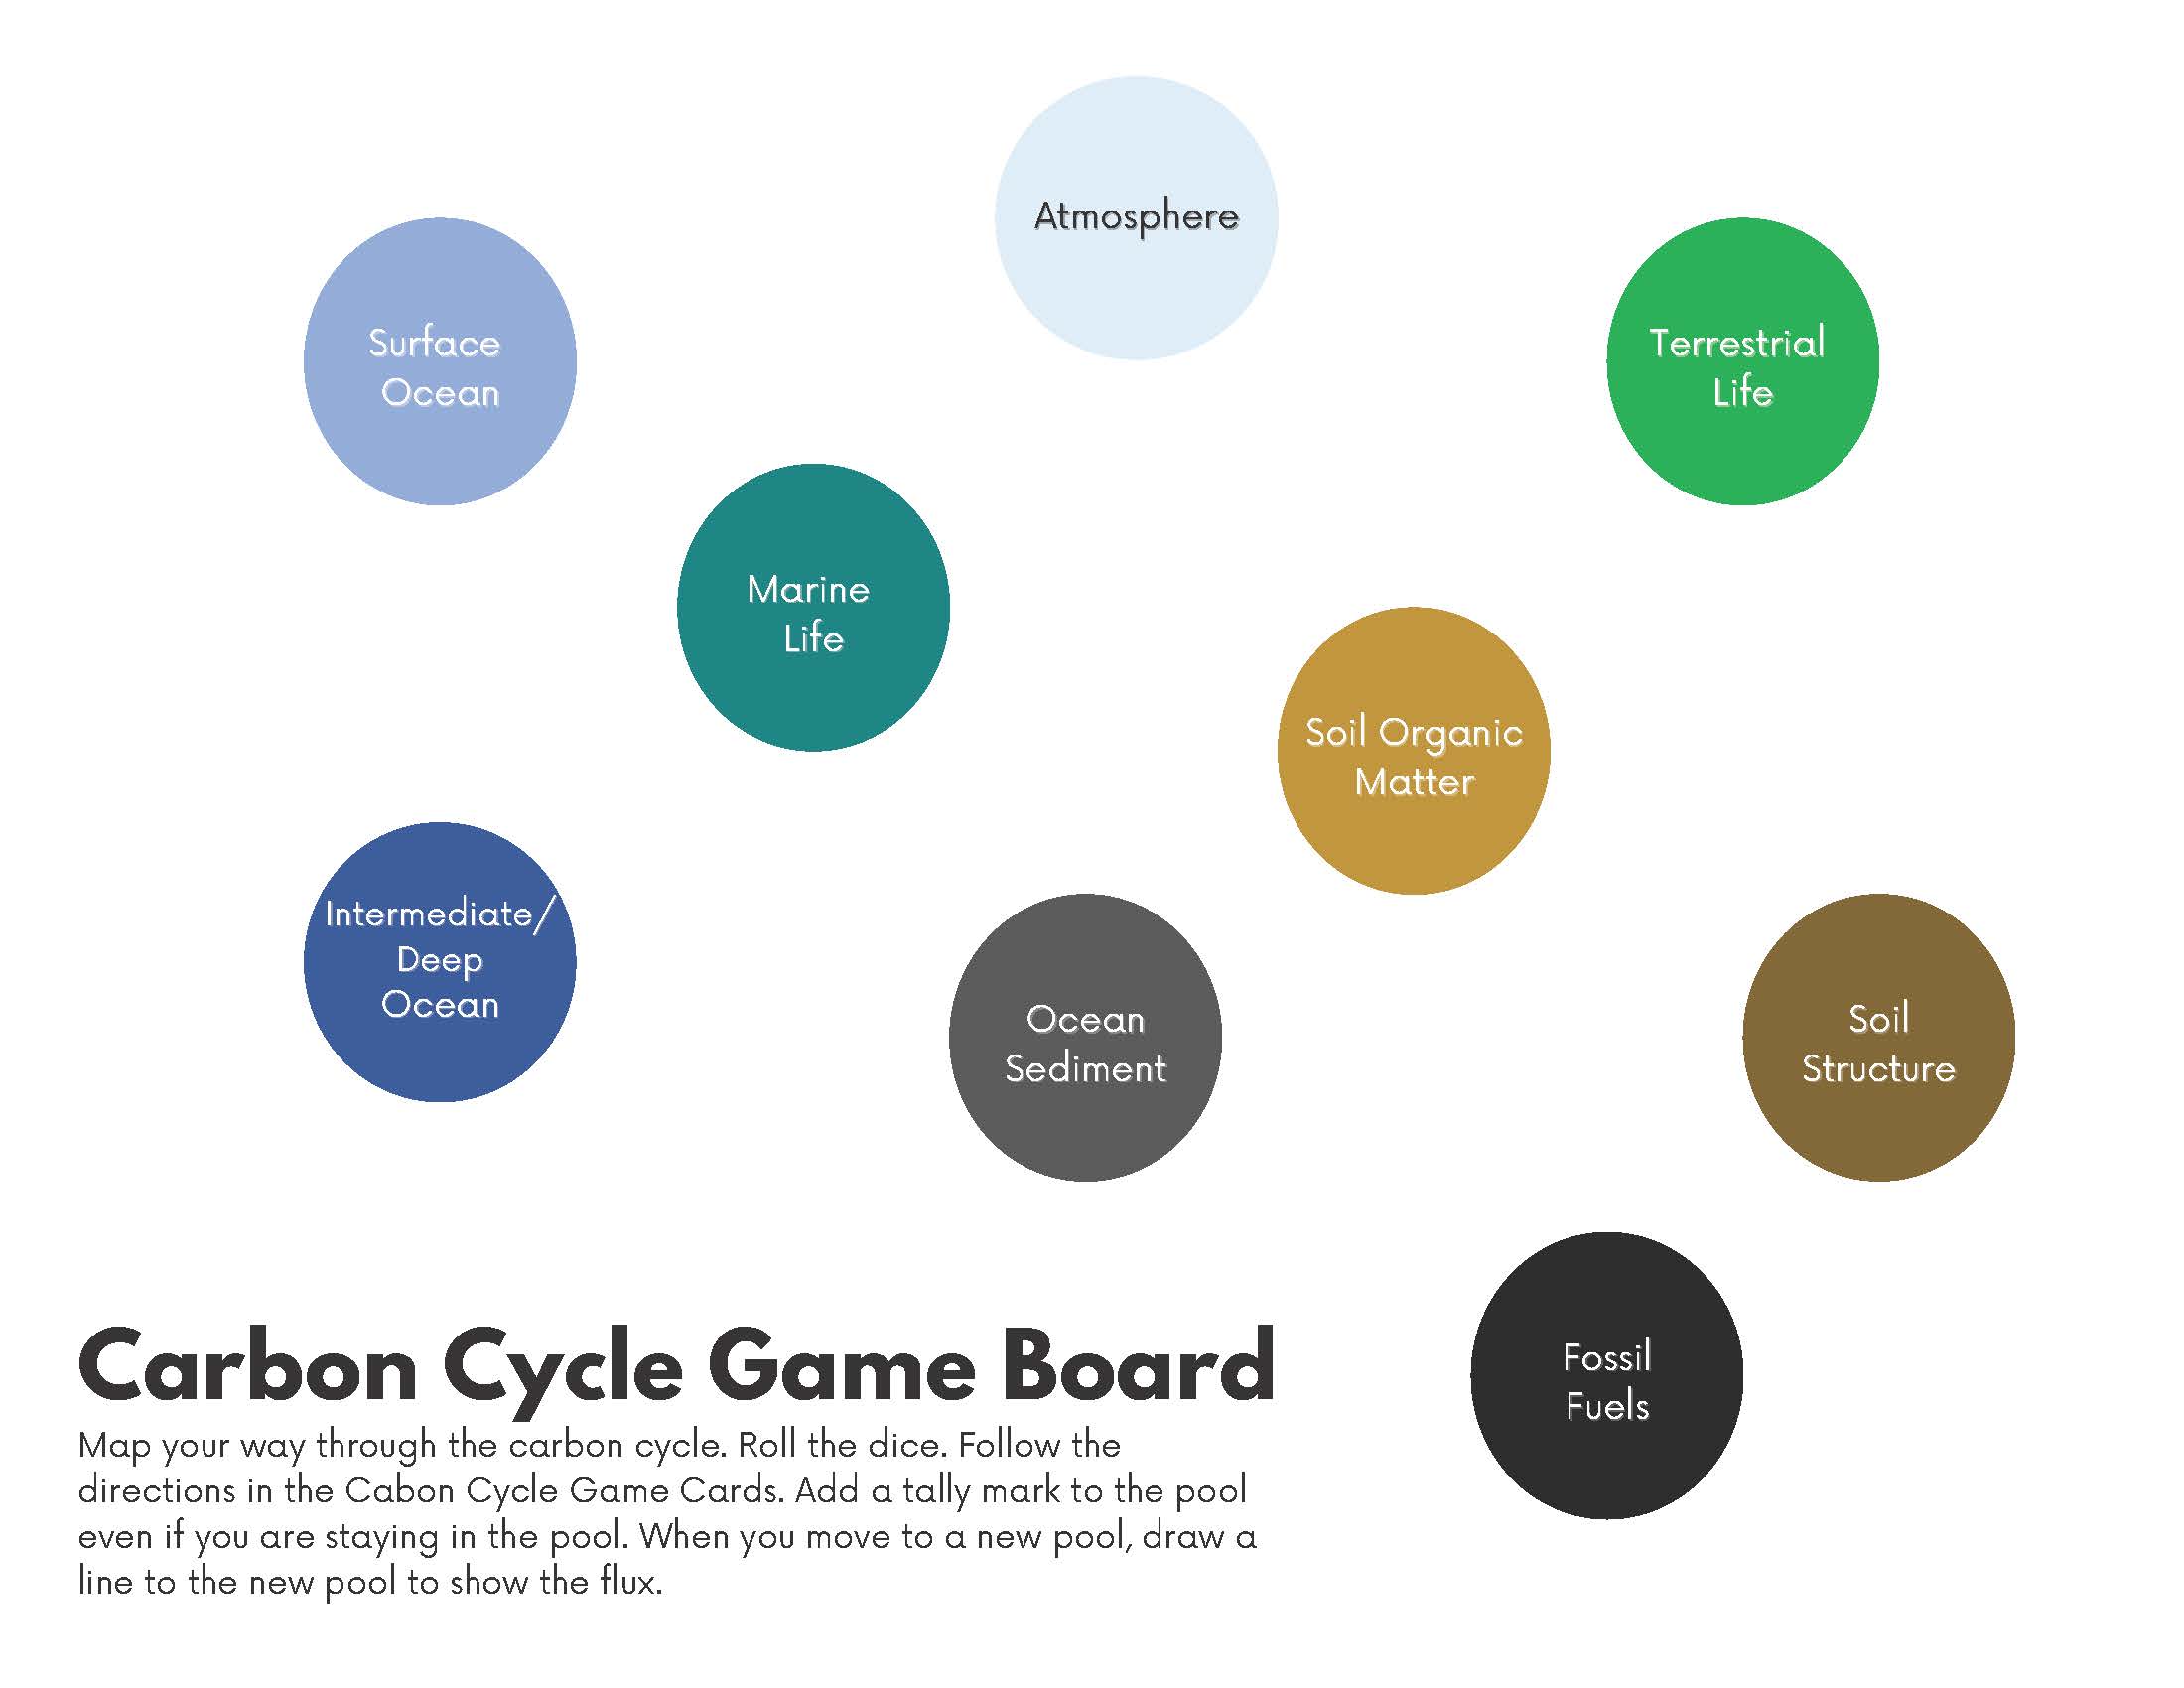 Carbon Cycle game board from South Dakota Discovery Center's Soil Biology Respiration callout lesson